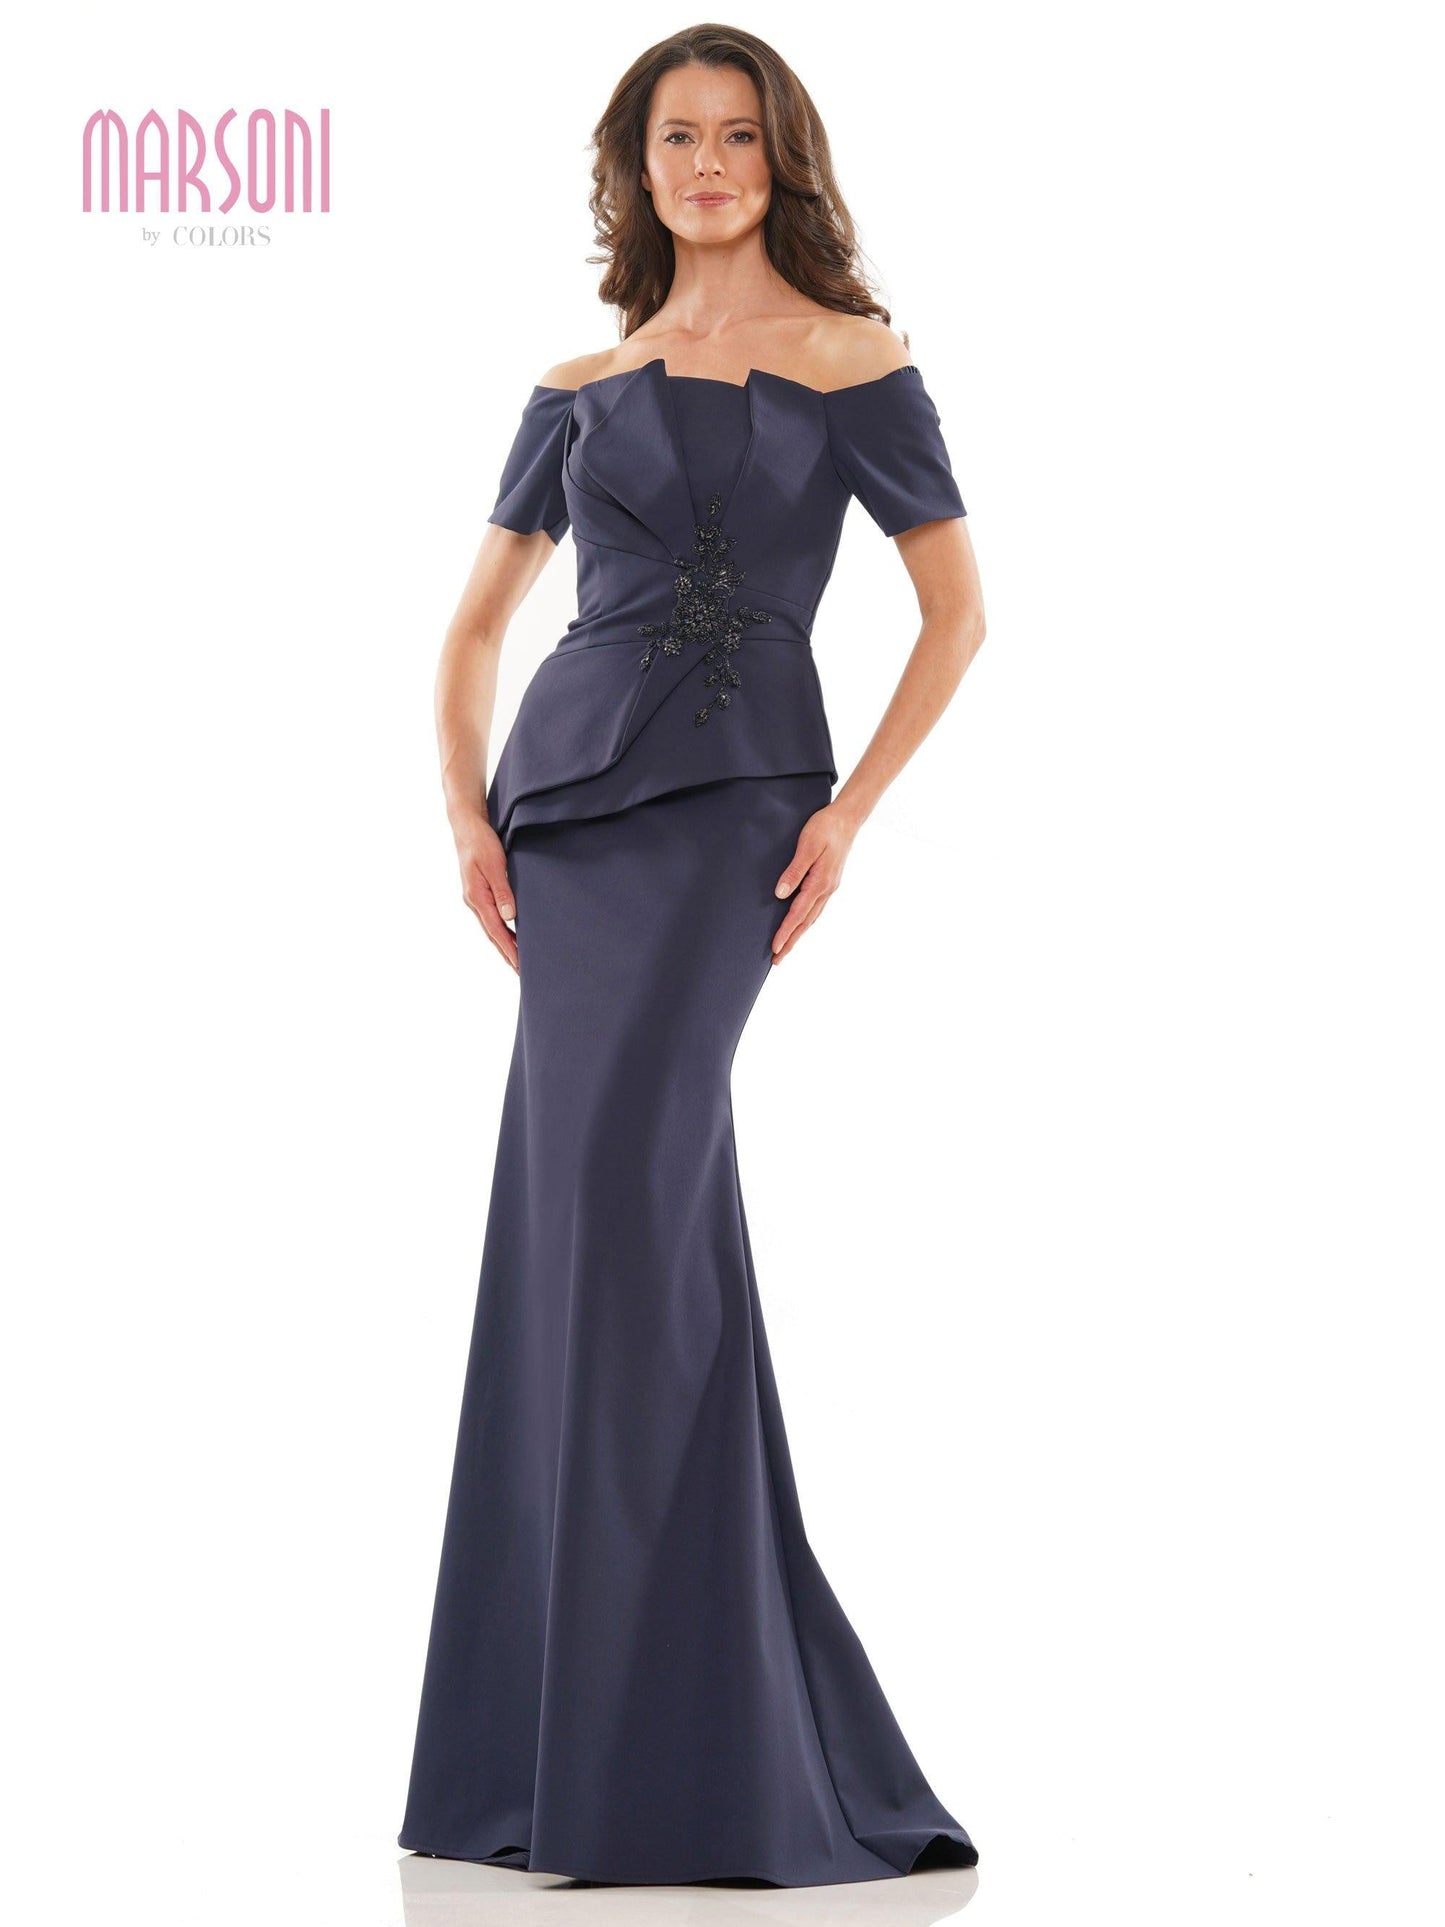 Marsoni Long Off Shoulder Fitted Formal Gown 1163 - The Dress Outlet